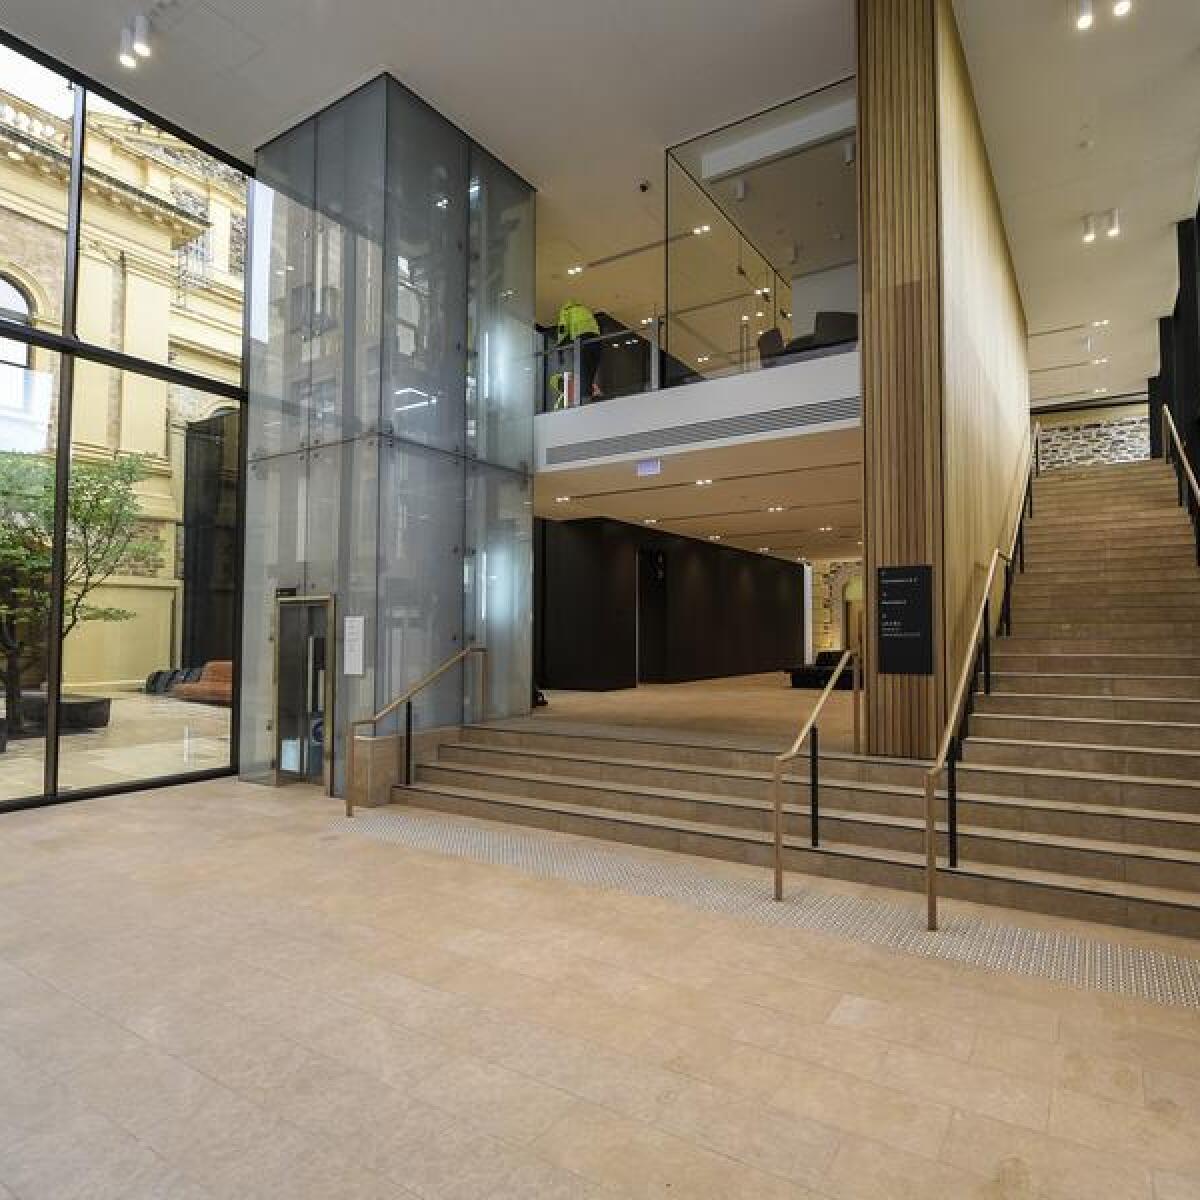 Foyer at the Supreme Court of South Australia in Adelaide